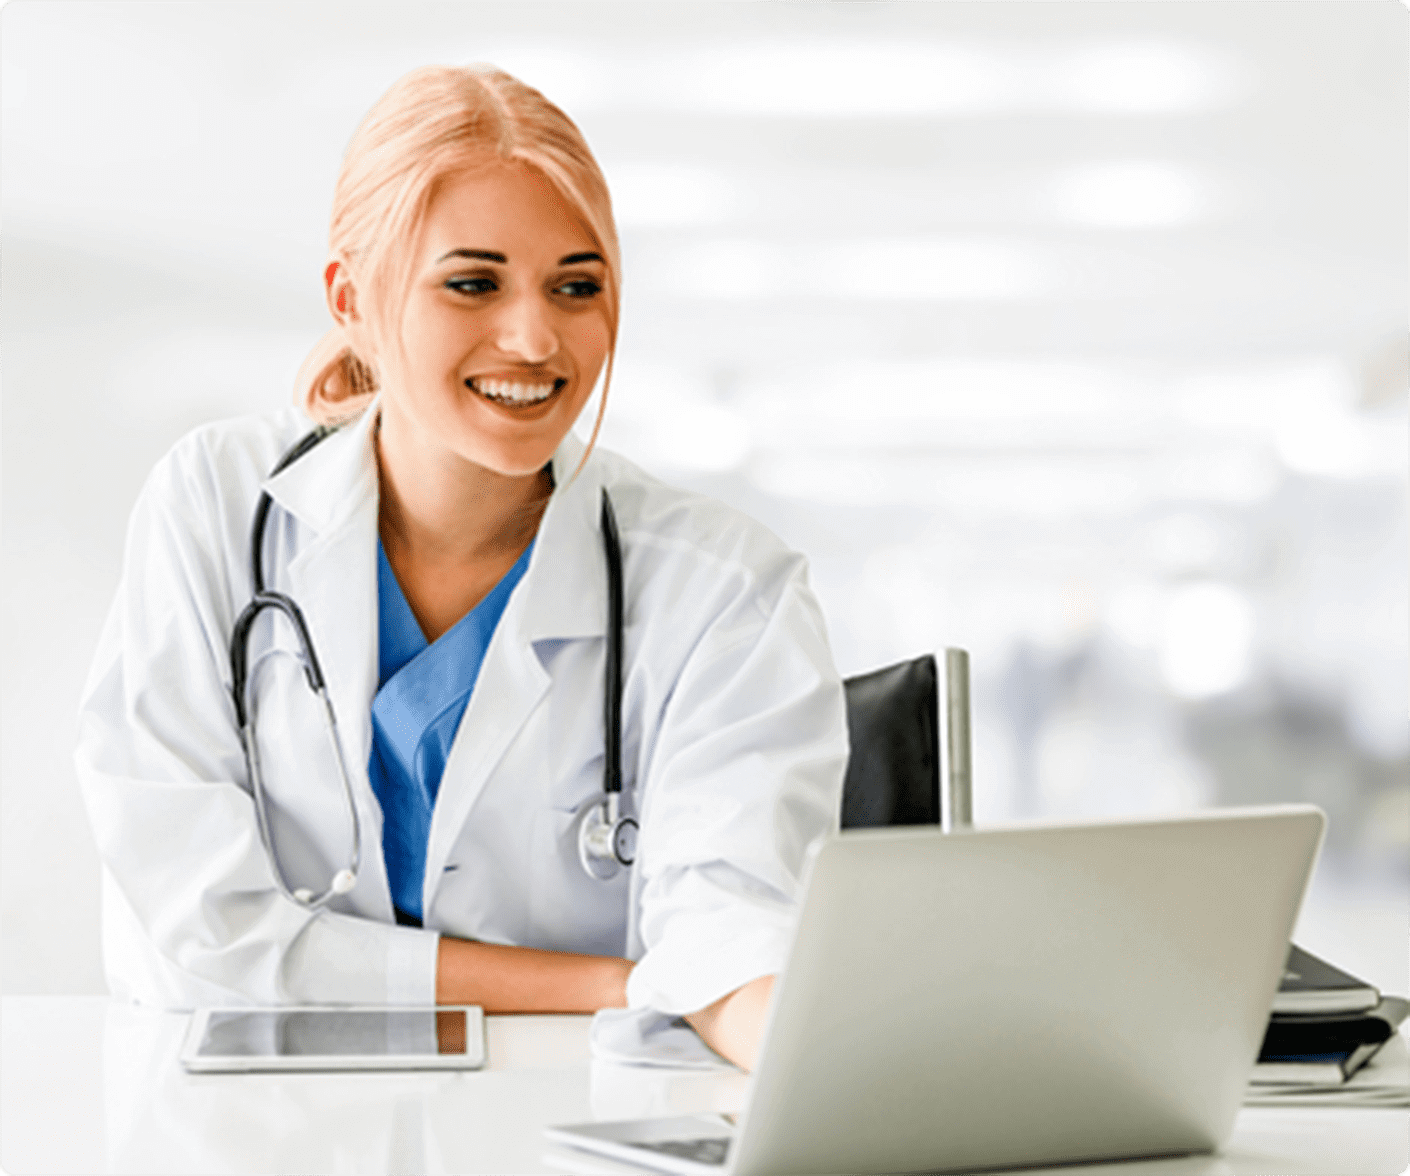 Female doctor sits at a desk smiling at her laptop screen